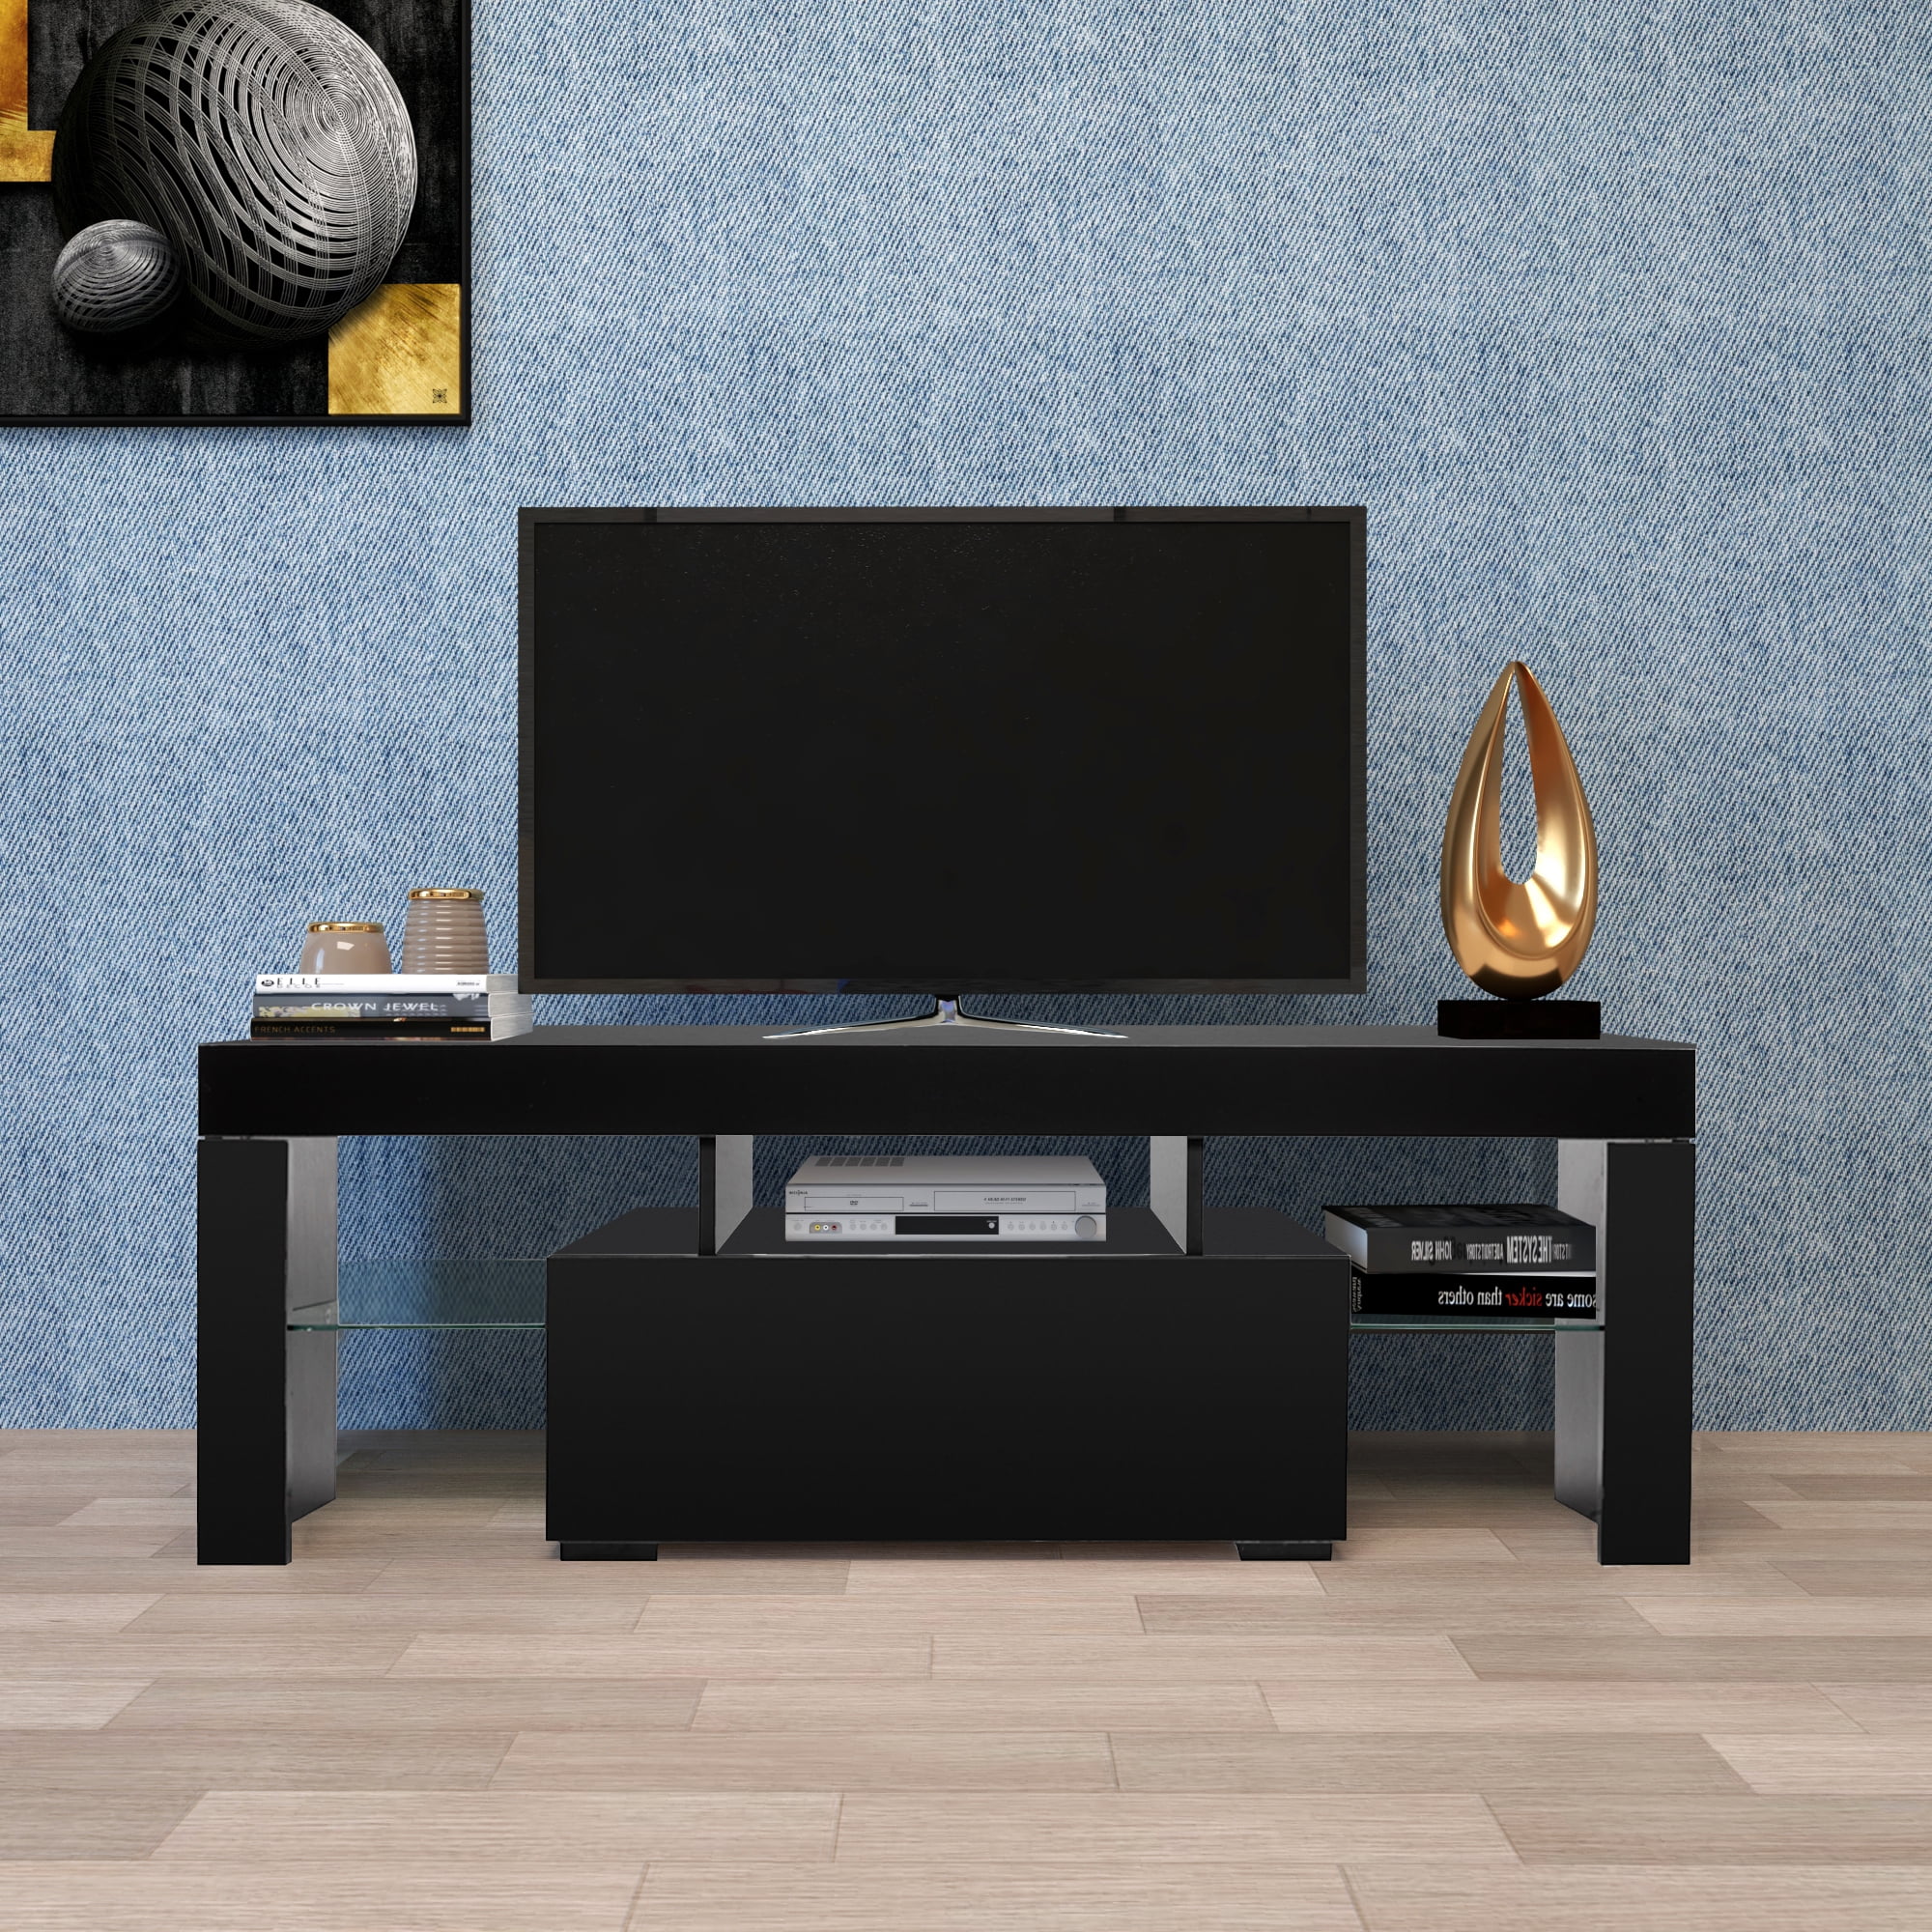 Entertainment Centers and TV Stands, YOFE TV Stand with LED Lights